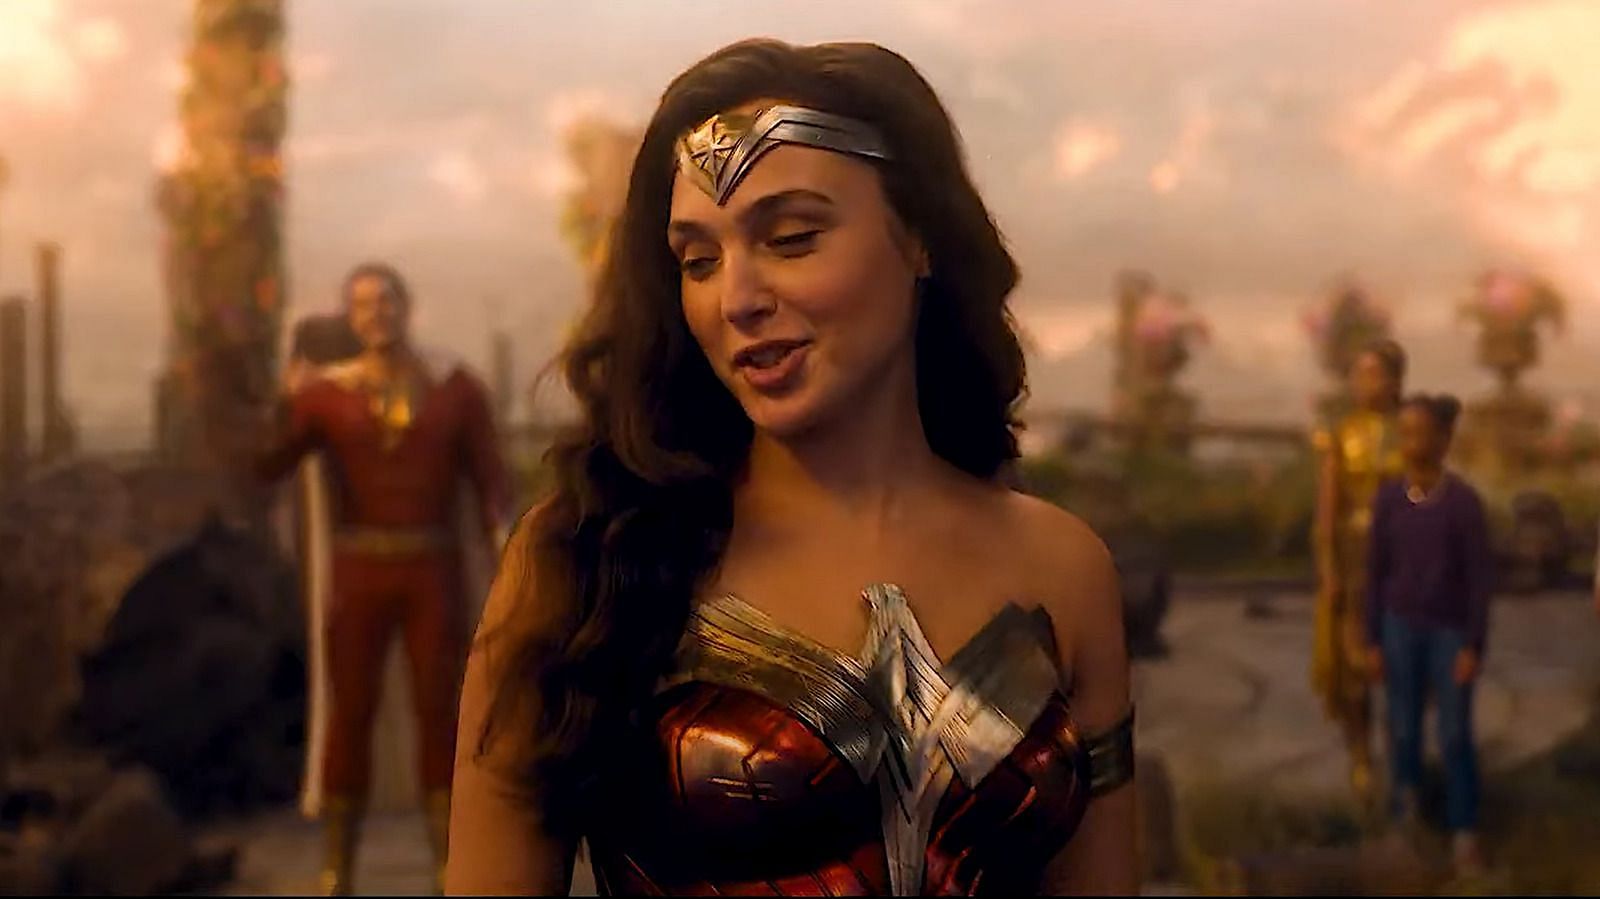 The Wonder Woman cameo in Shazam 2 left fans disappointed and underwhelmed (Image via Warner Bros)